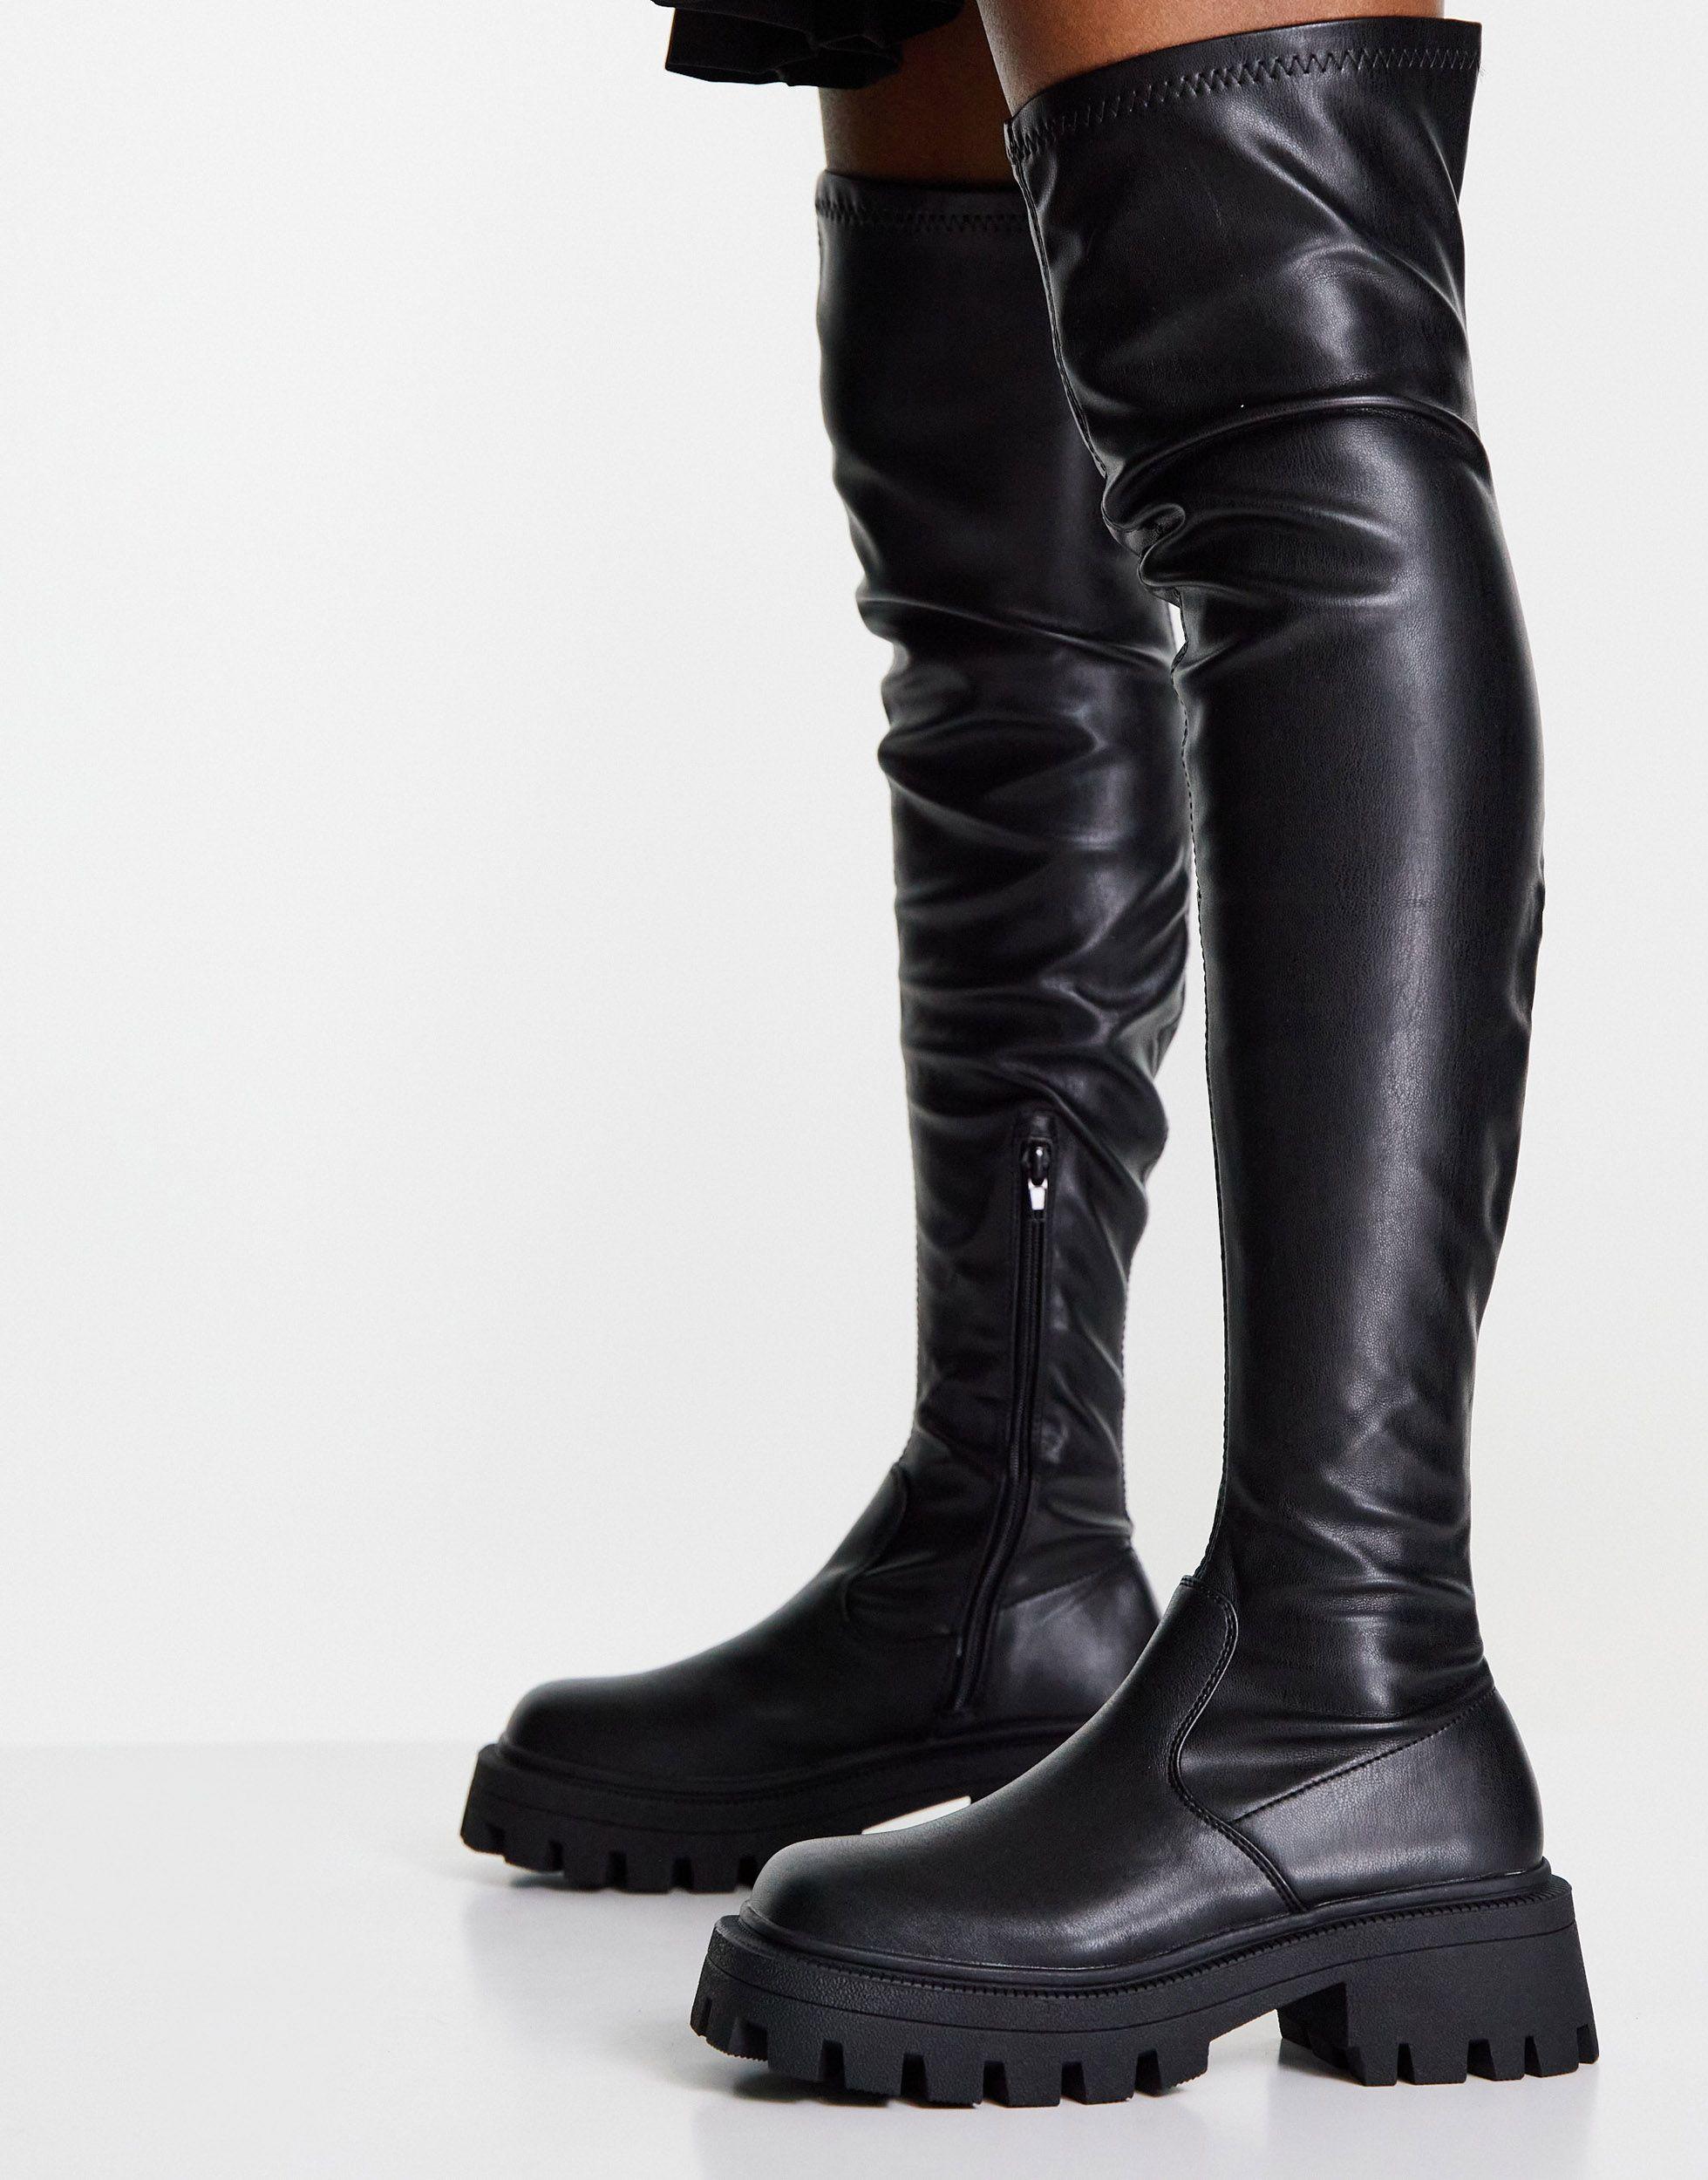 ASOS Petite Kassidy Chunky Square Toe Over The Knee Boots in Black | Lyst